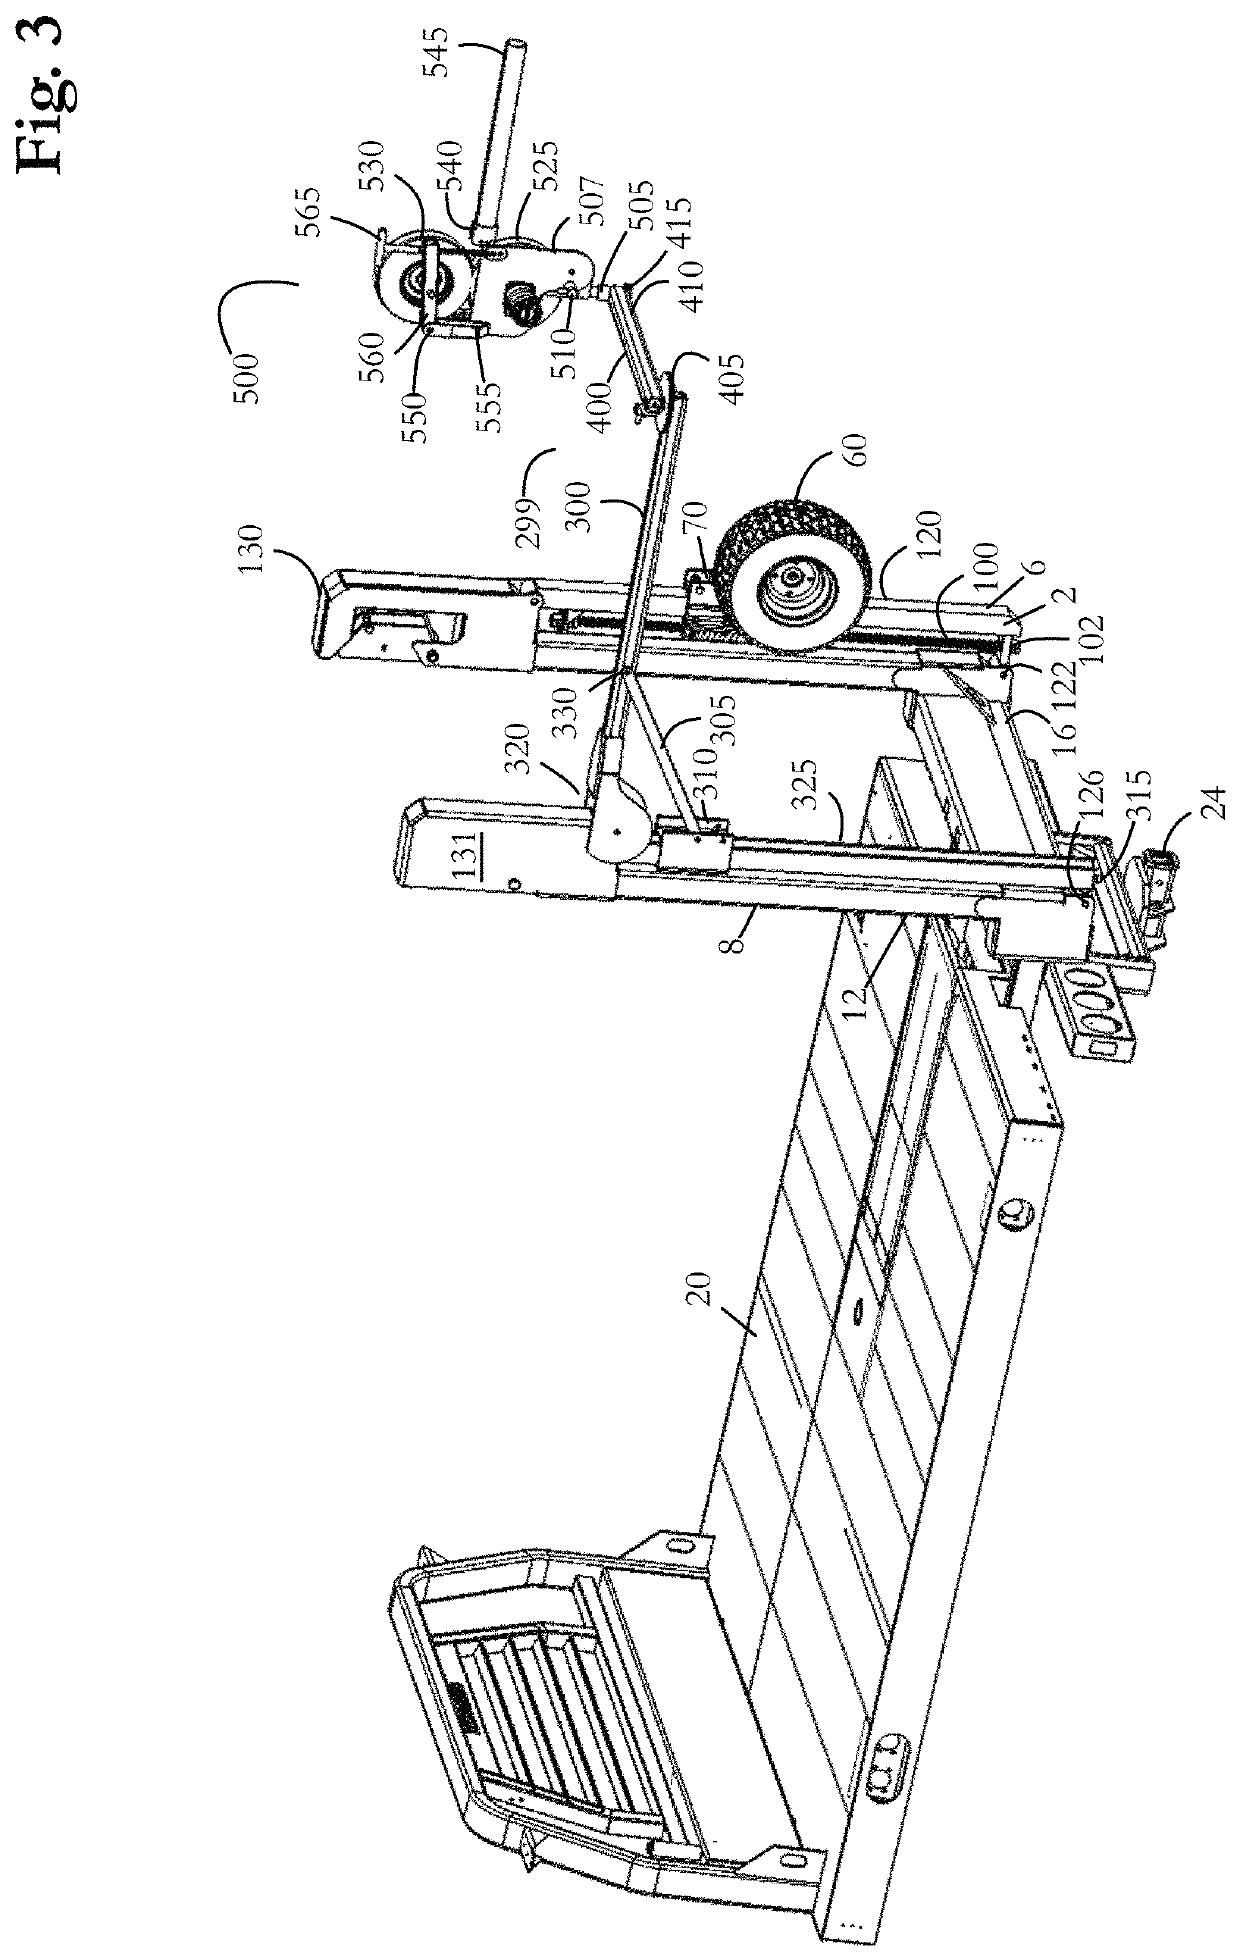 Self-stowing cable dispenser for figure eighting